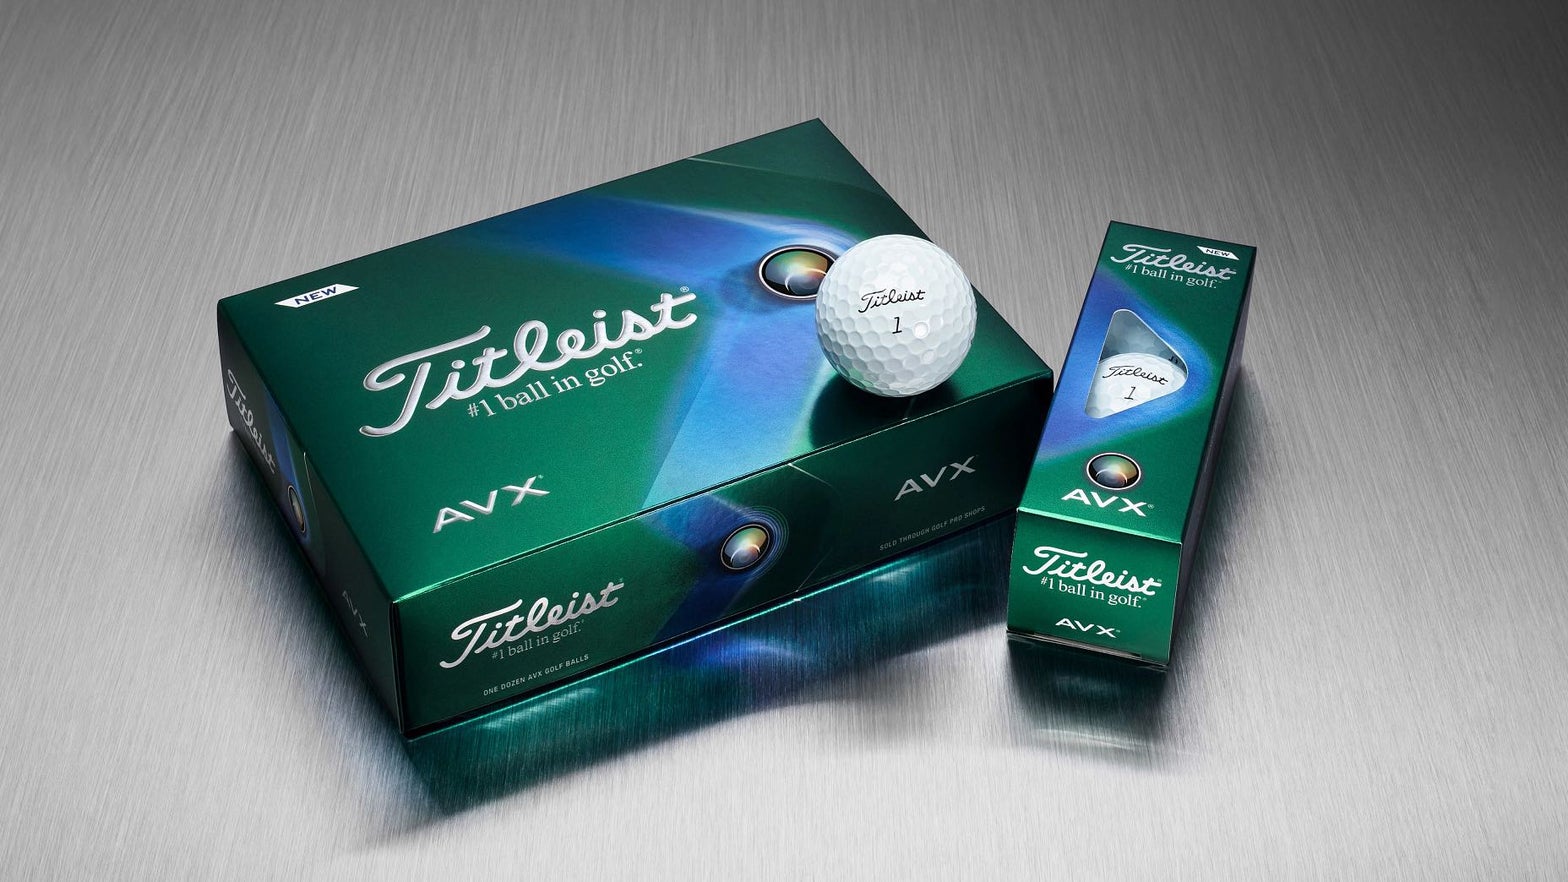 Titleist's new AVX golf ball delivers more distance, short game spin